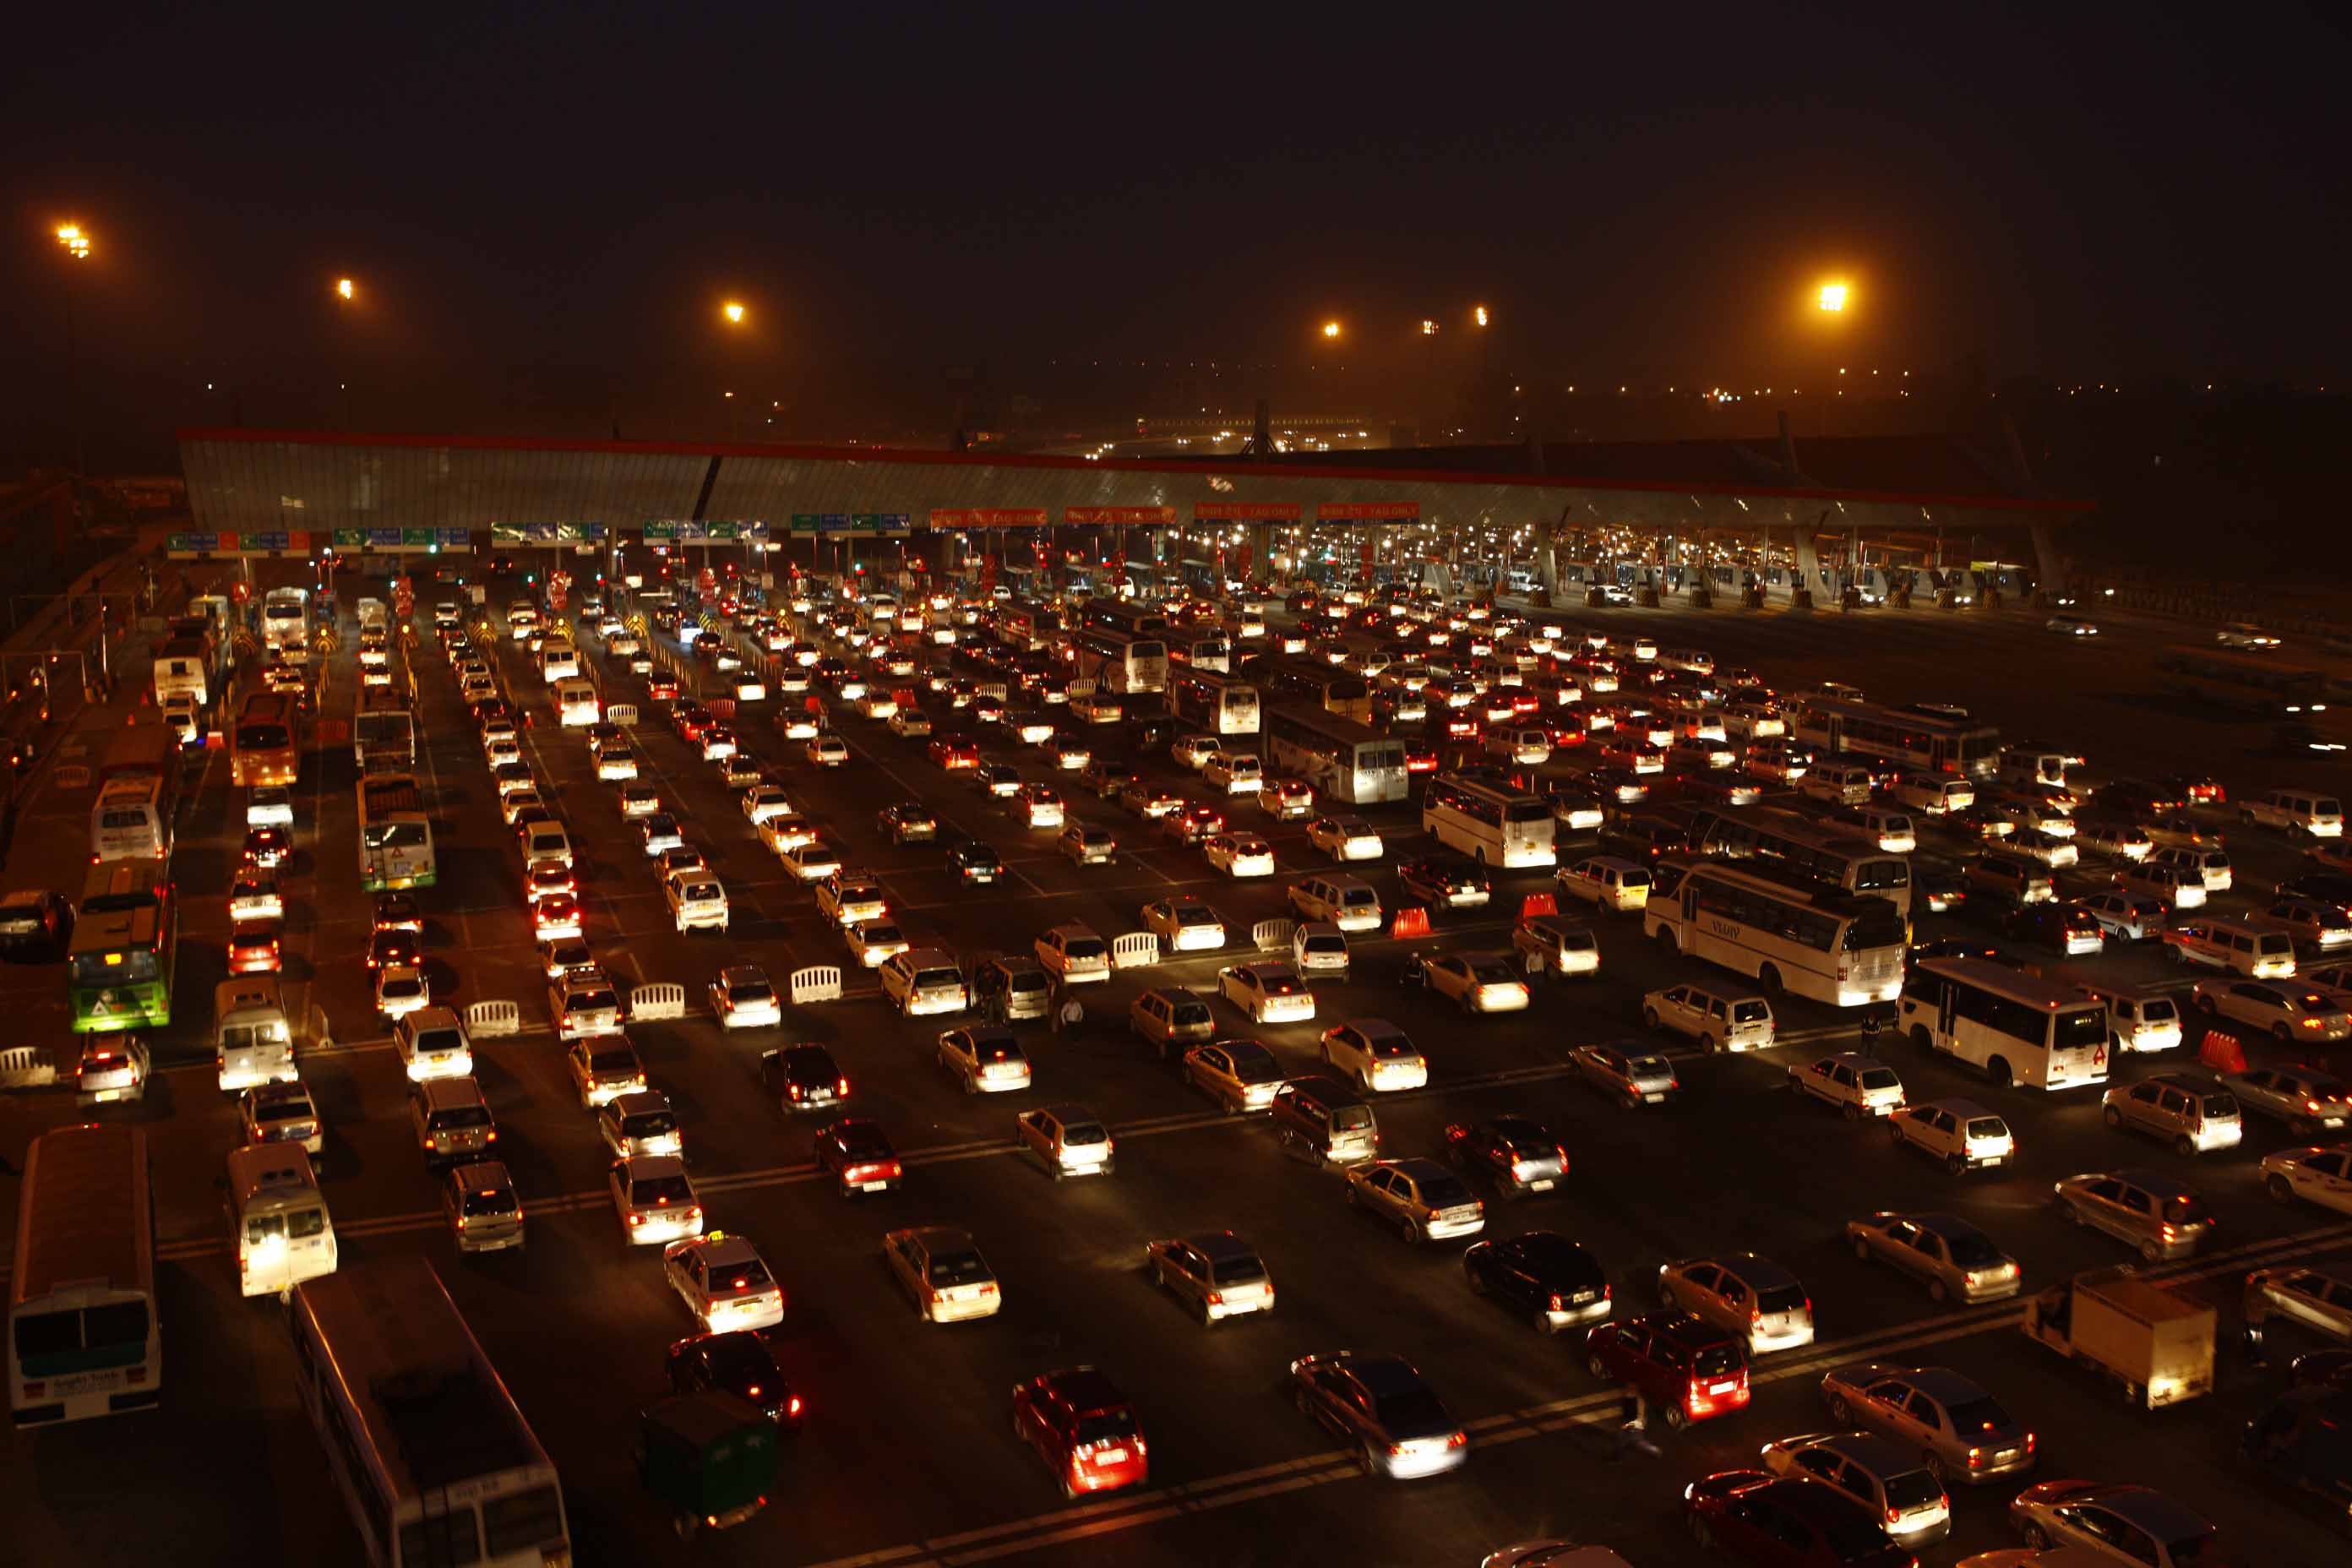 40 toll plazas in Maharashtra could be scrapped